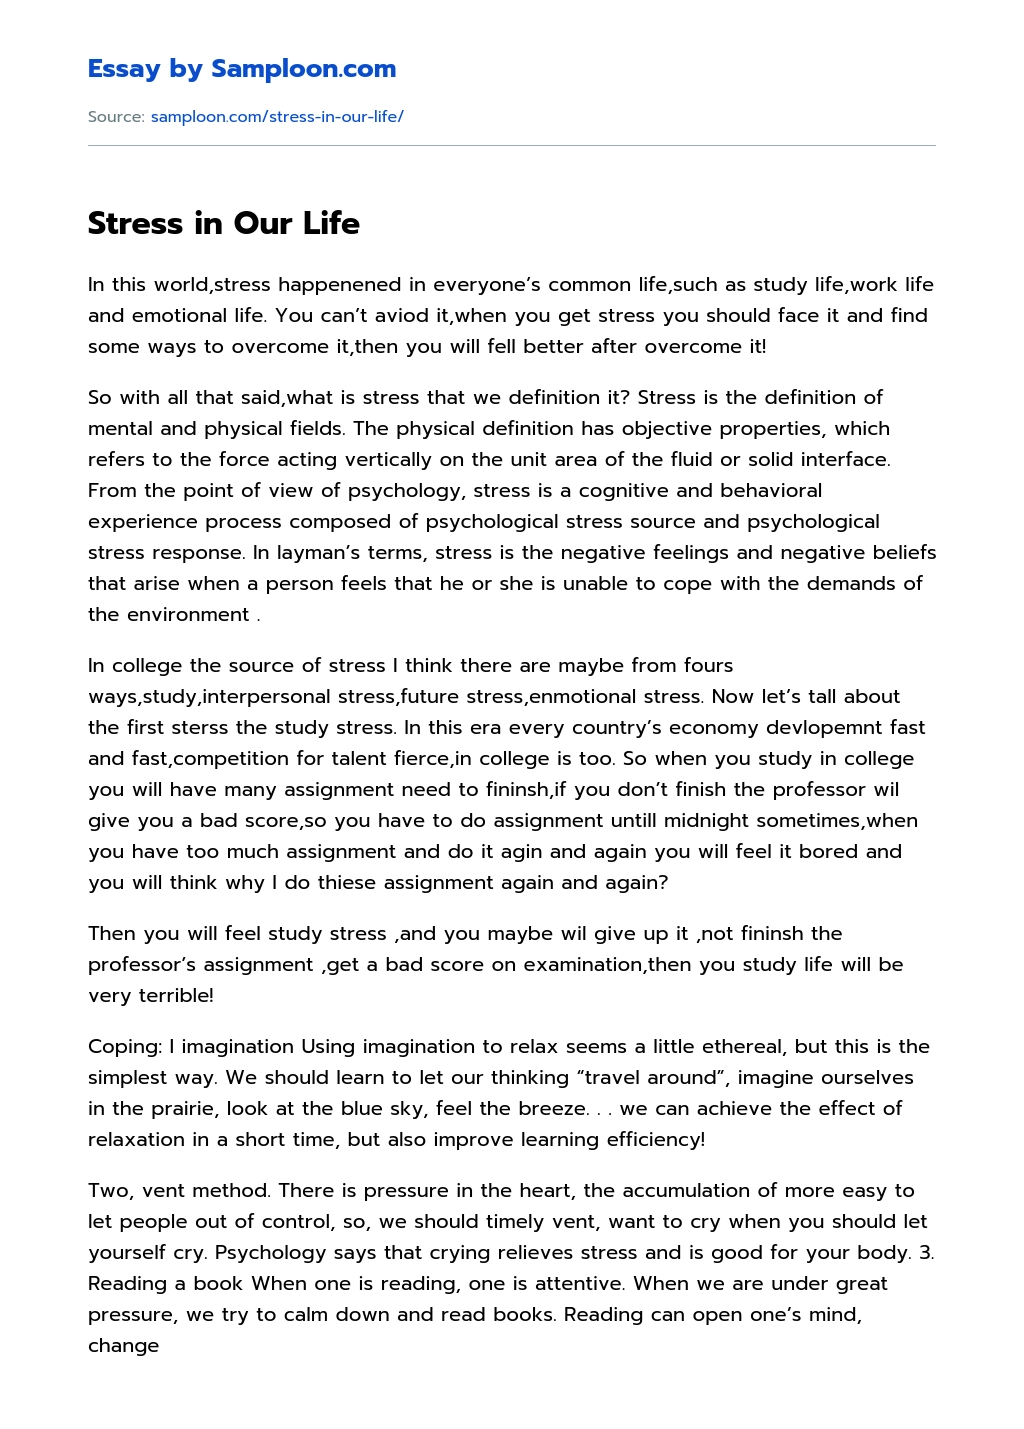 Stress in Our Life essay